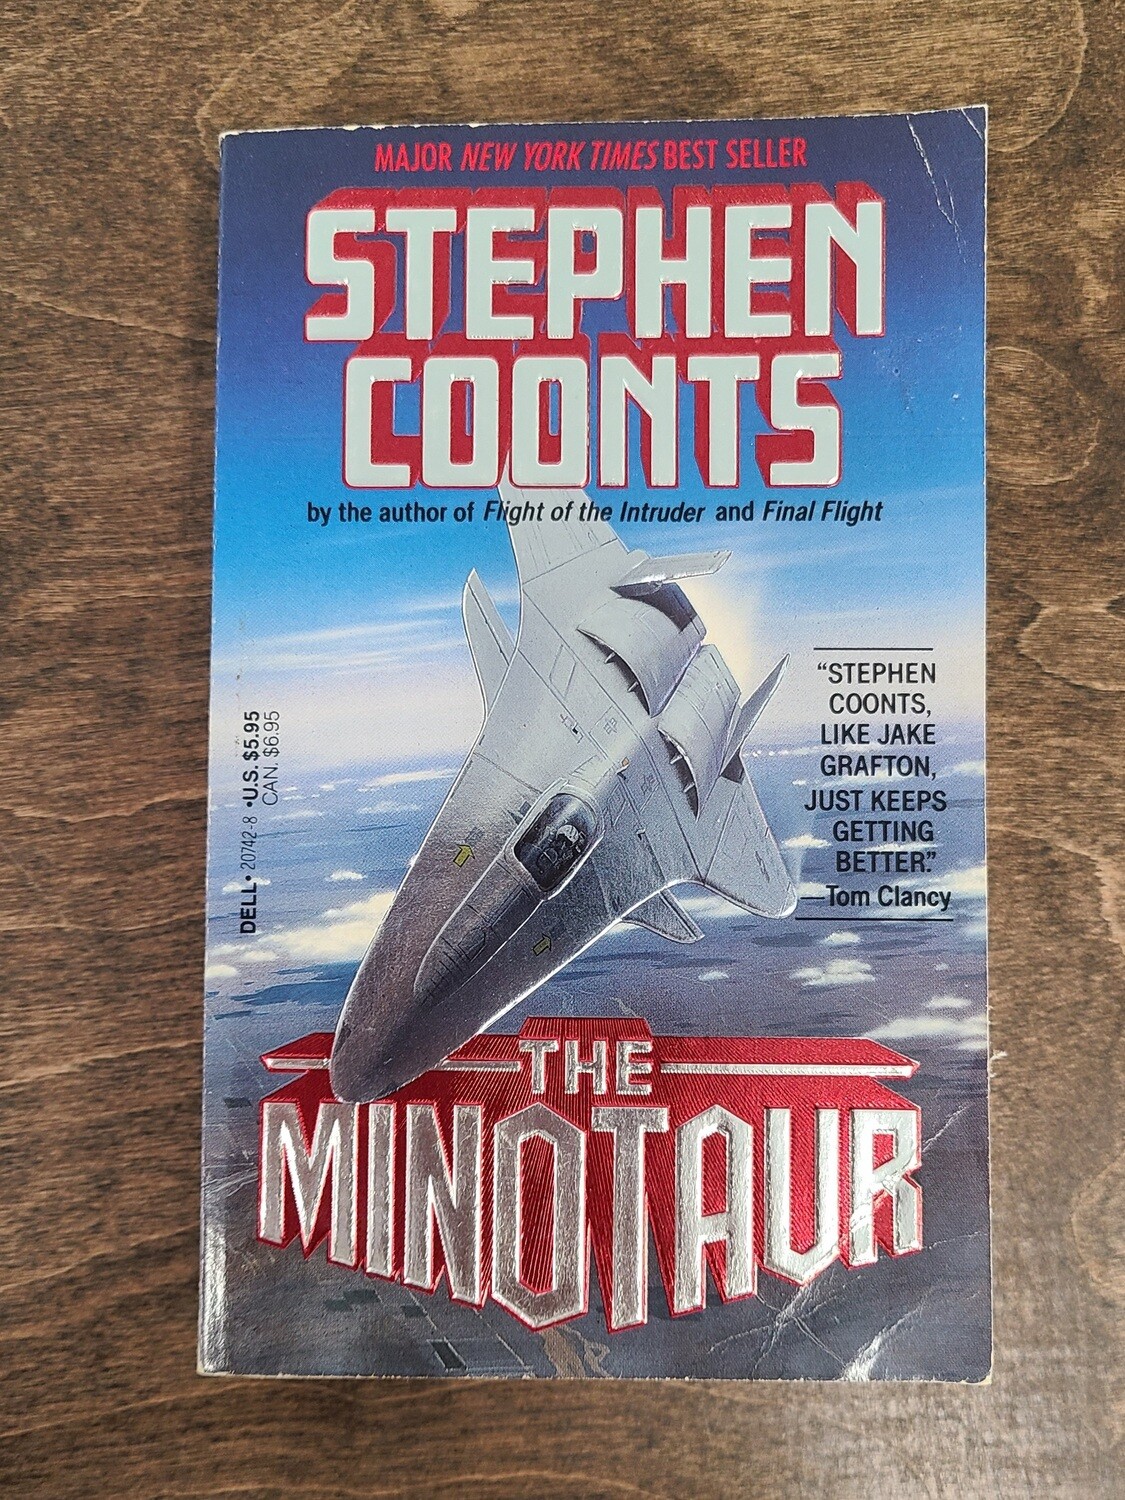 The Intruders, Book by Stephen Coonts